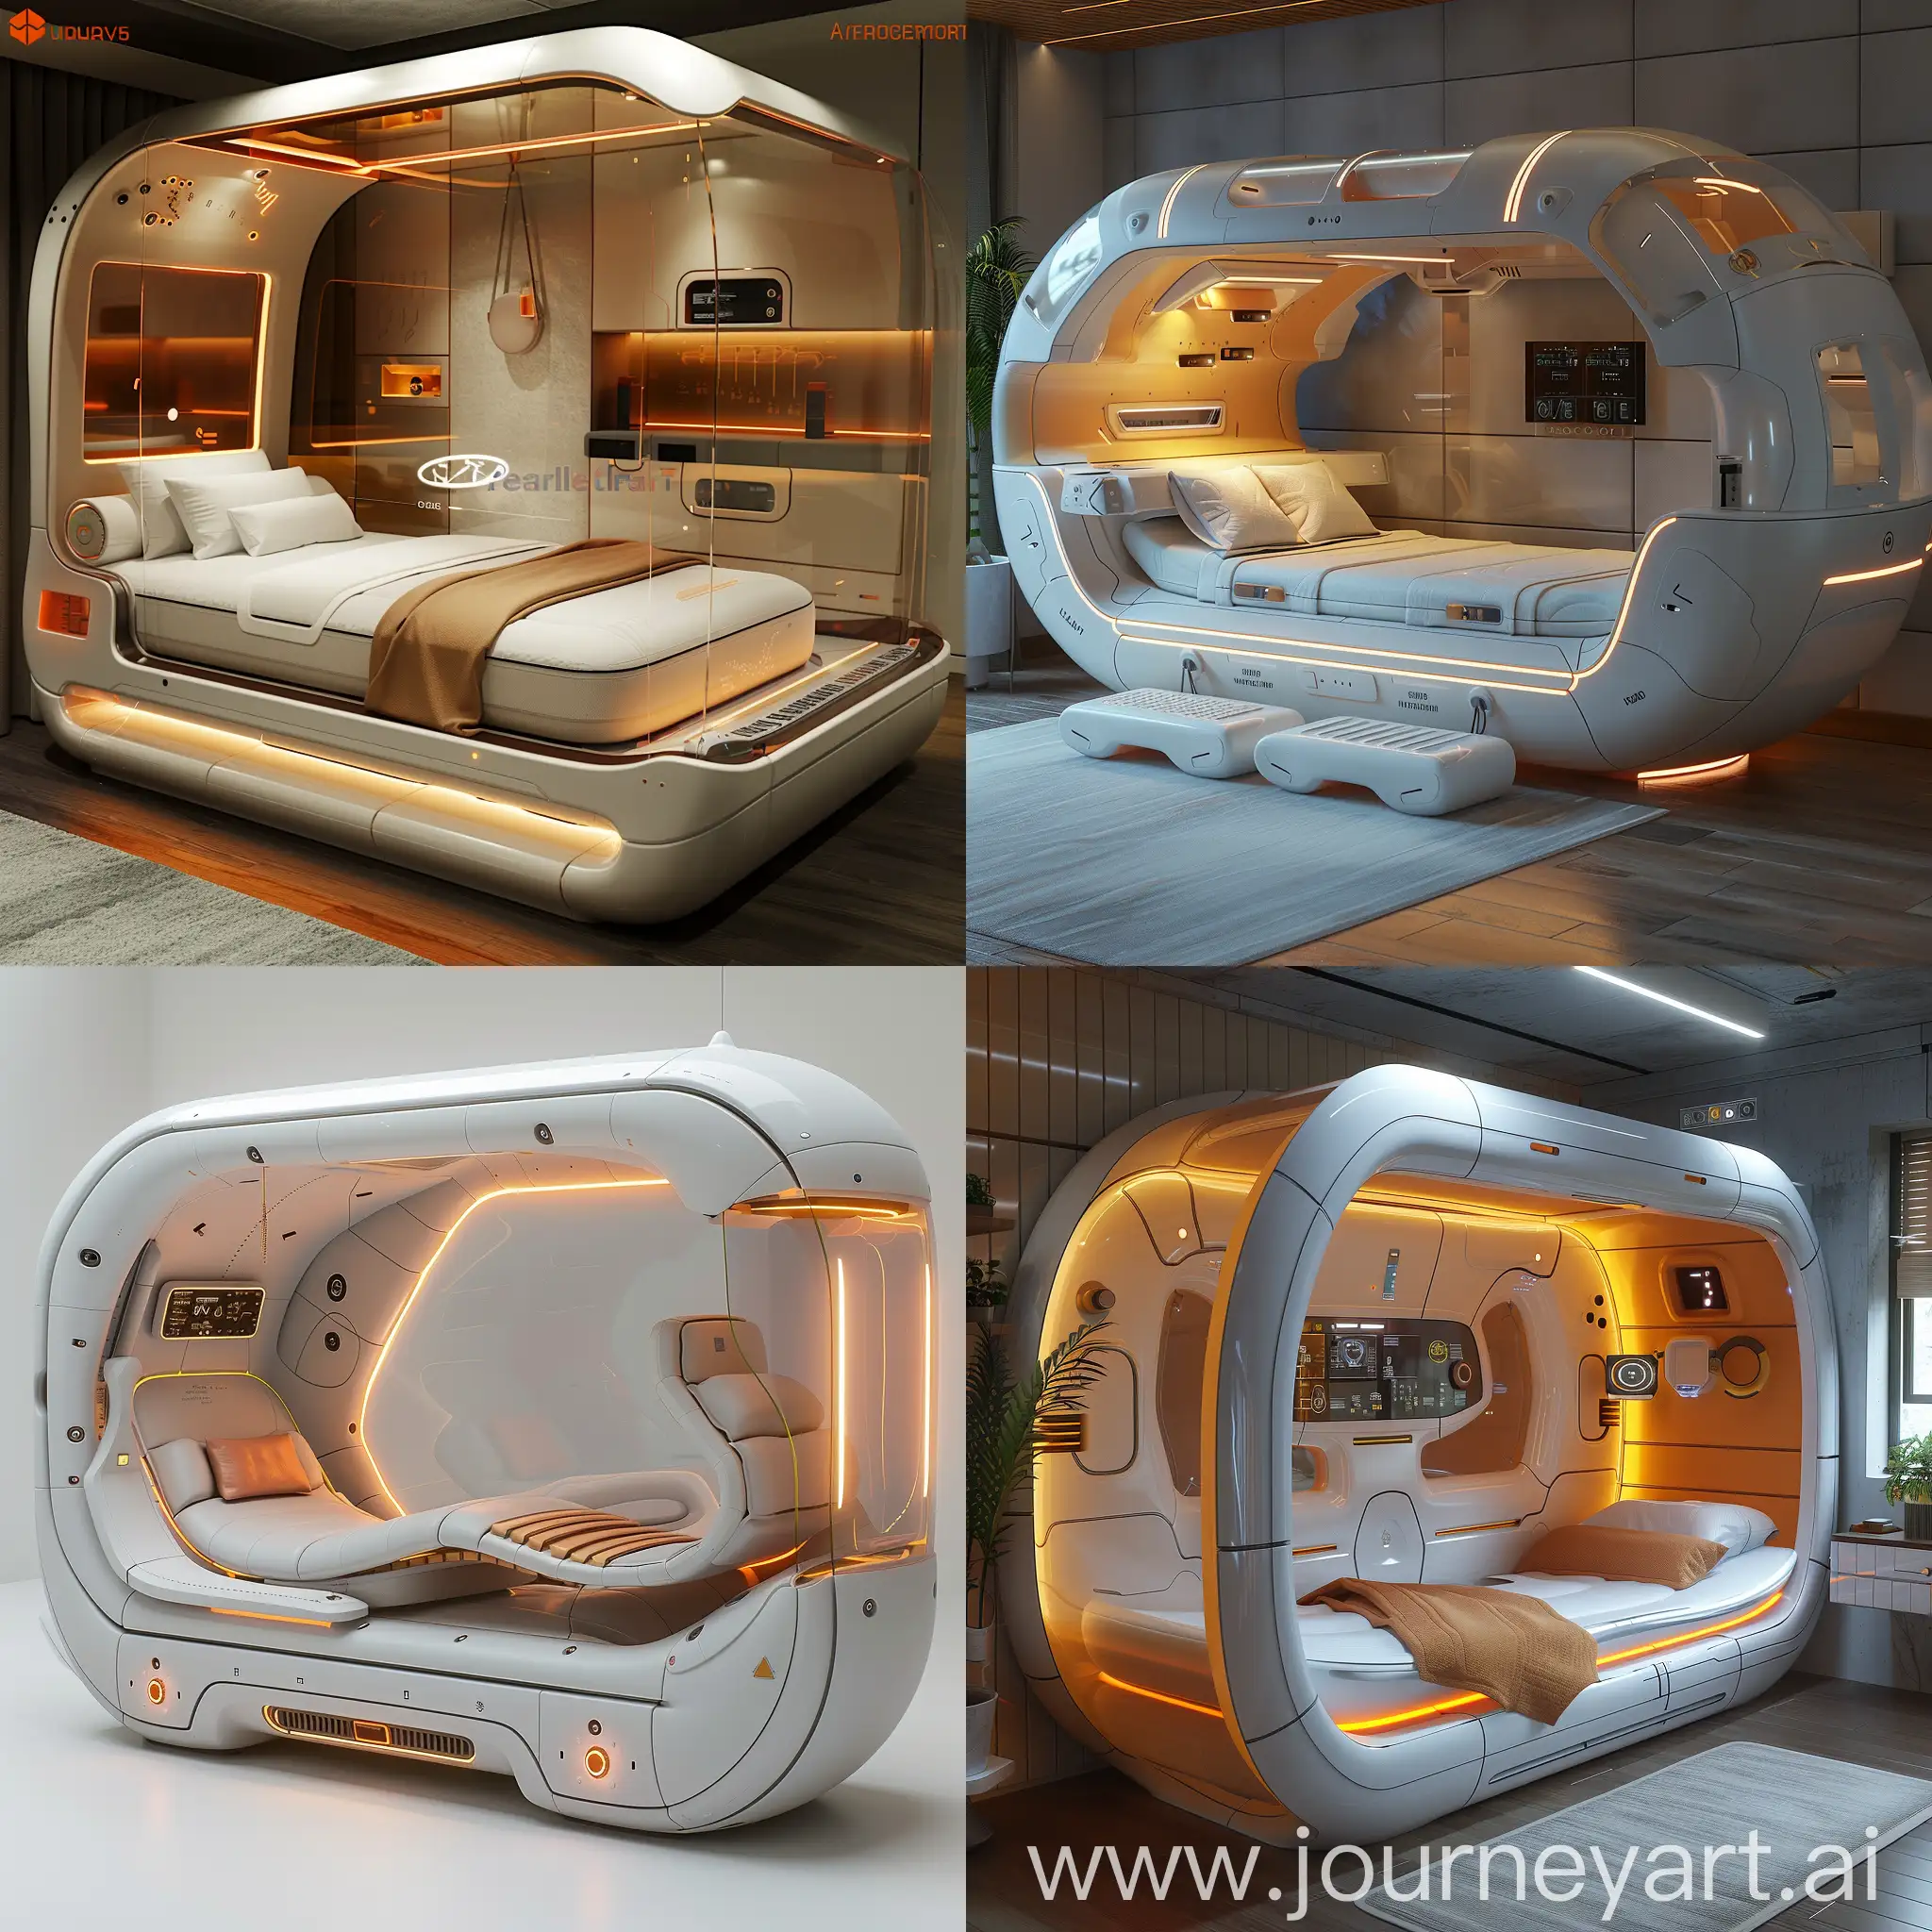 Futuristic bed, Adjustable Firmness Controls, Climate Control System, Sleep Monitoring Sensors, Smart Fabric Technology, Automated Cleaning Mechanisms, Built-in Massage Modules, Sound System and White Noise Generator, Wireless Charging Pads, Programmable Lighting, Emergency Alert System, Reinforced Frame Structure, Modular Component Design, Scratch-Resistant Surfaces, Waterproof and Stain-Resistant Fabrics, Anti-Corrosion Coating, Vibration Dampening, Thermal Management Systems, Dust and Allergen Filters, Battery Backup, Quality Assurance Sensors, Sleek, Aerodynamic Contours, Interactive Touch Panels, Ambient Lighting, Retractable Covers, Transparent Display Headboard, Integrated Sound System, Modular Add-Ons, Elevating Base, Smart Glass Privacy Panels, Solar Panels, Impact-Resistant Edges, UV-Resistant Coatings, Weatherproof Materials, Tempered Glass Components, Heavy-Duty Hinges and Joints, Non-Fading Textiles, Rust-Proof Metalwork, Mold-Resistant Finishes, Reinforced Support Slats, Easy-Clean Surfaces, unreal engine 5 --stylize 1000